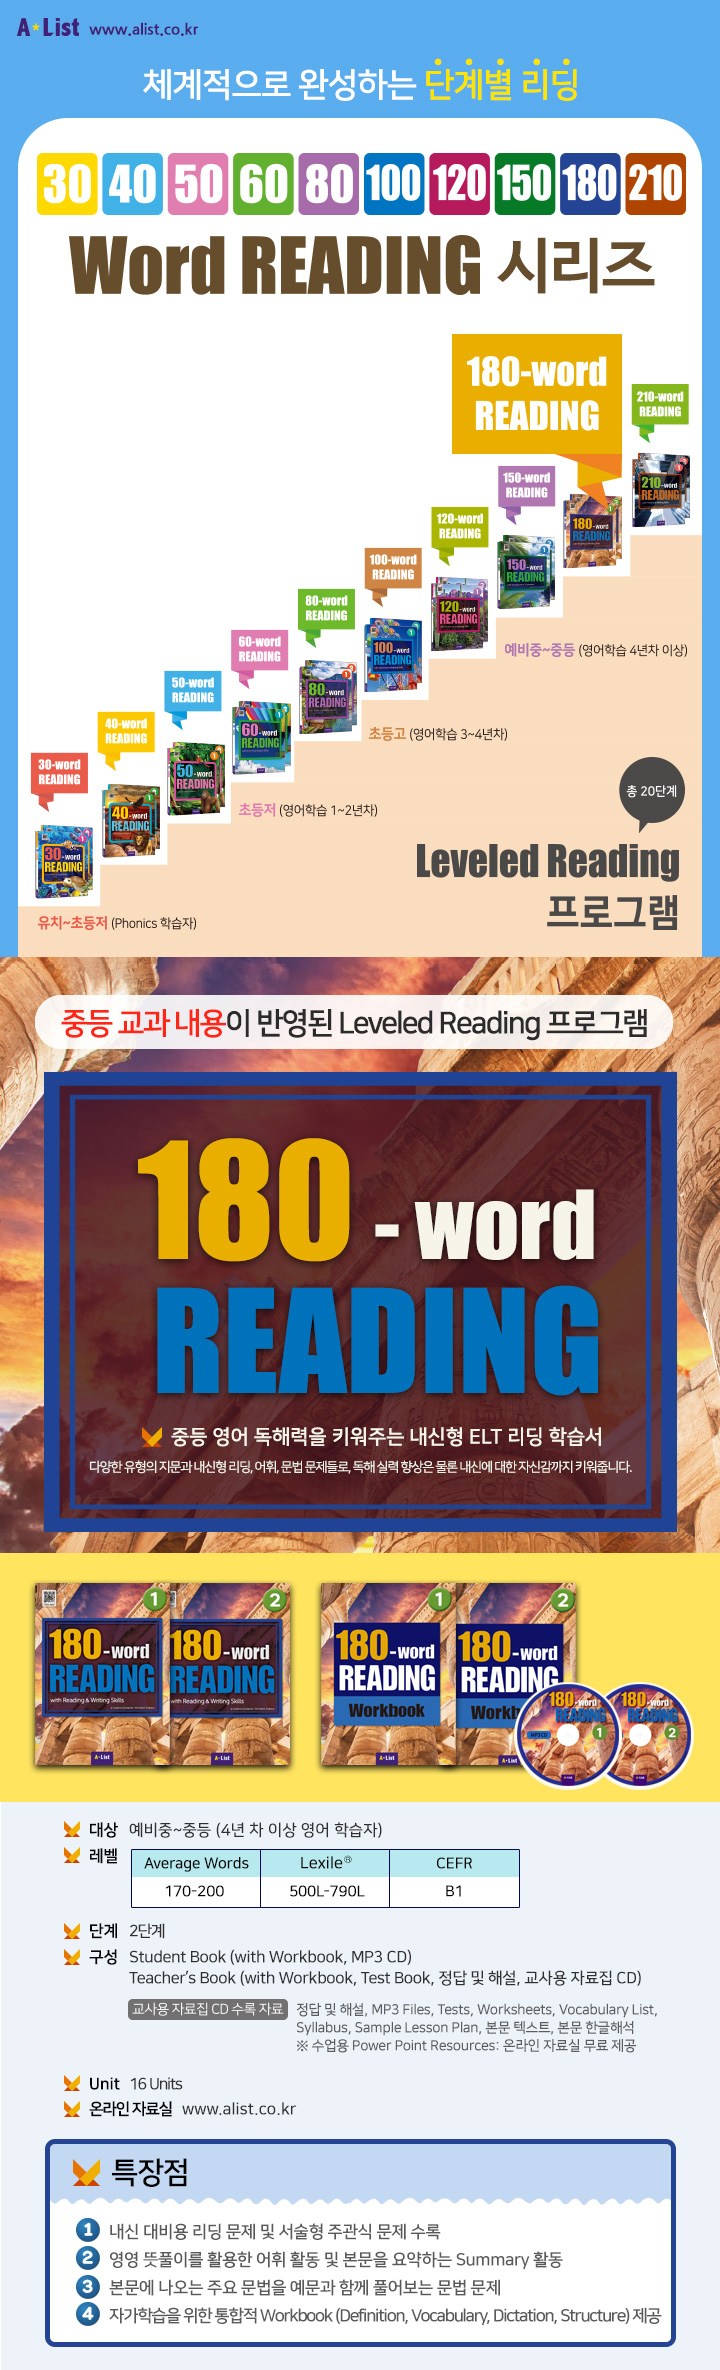 180-word-reading-1-teachers-book-tg-with-wb-mp3-cd